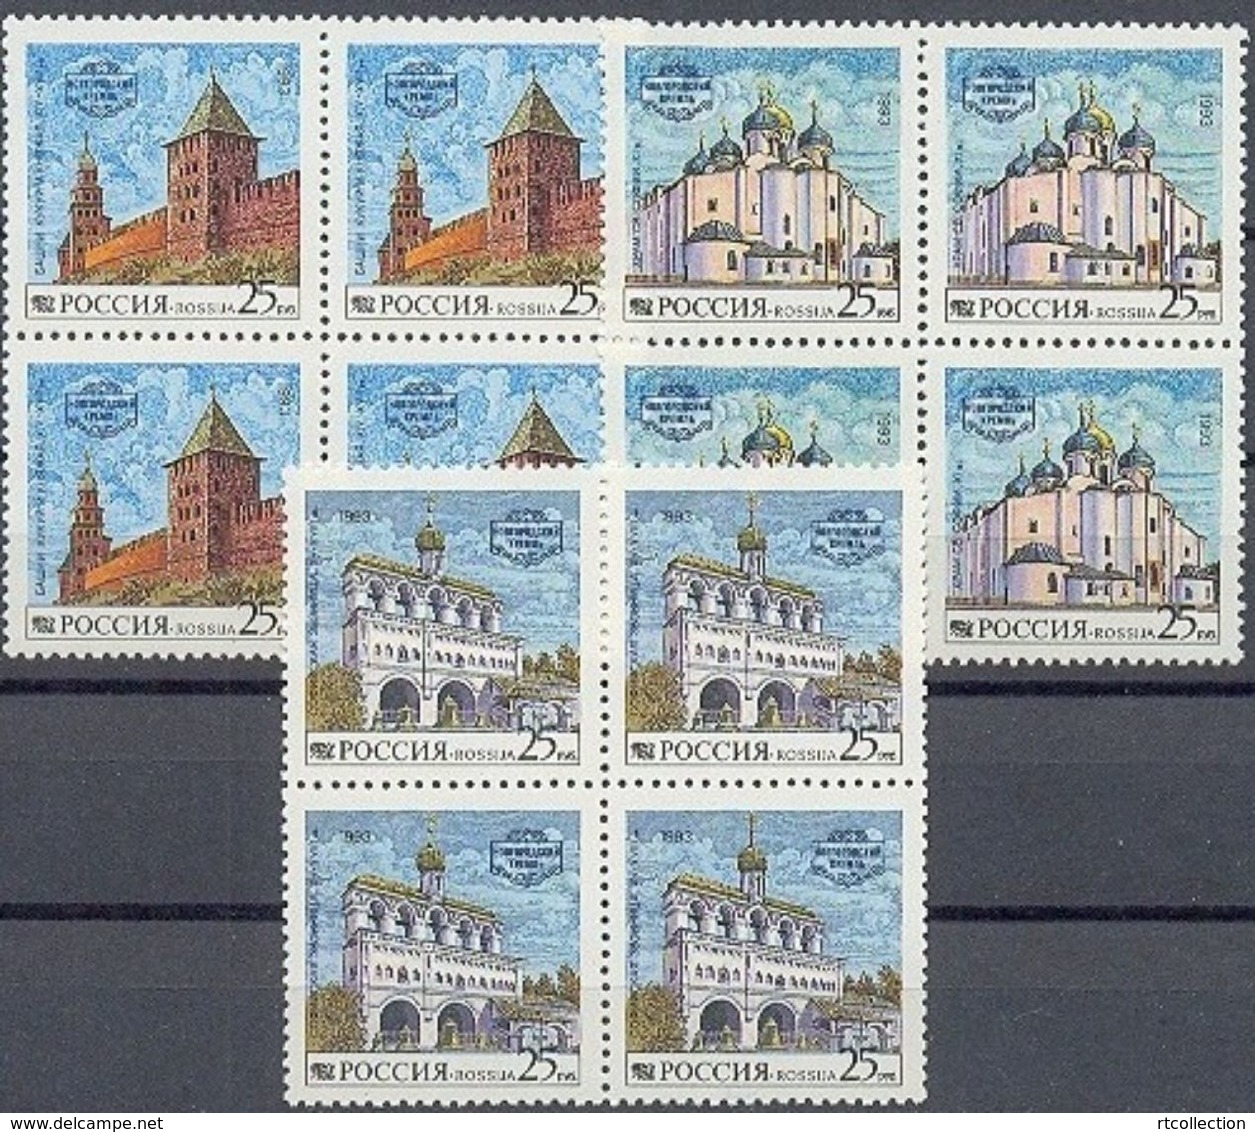 Russia 1993 Block Kremlin NOVGOROD Building Church Architecture Hall Palaces Geography Places Stamps MNH SC#6150-53 - Geography